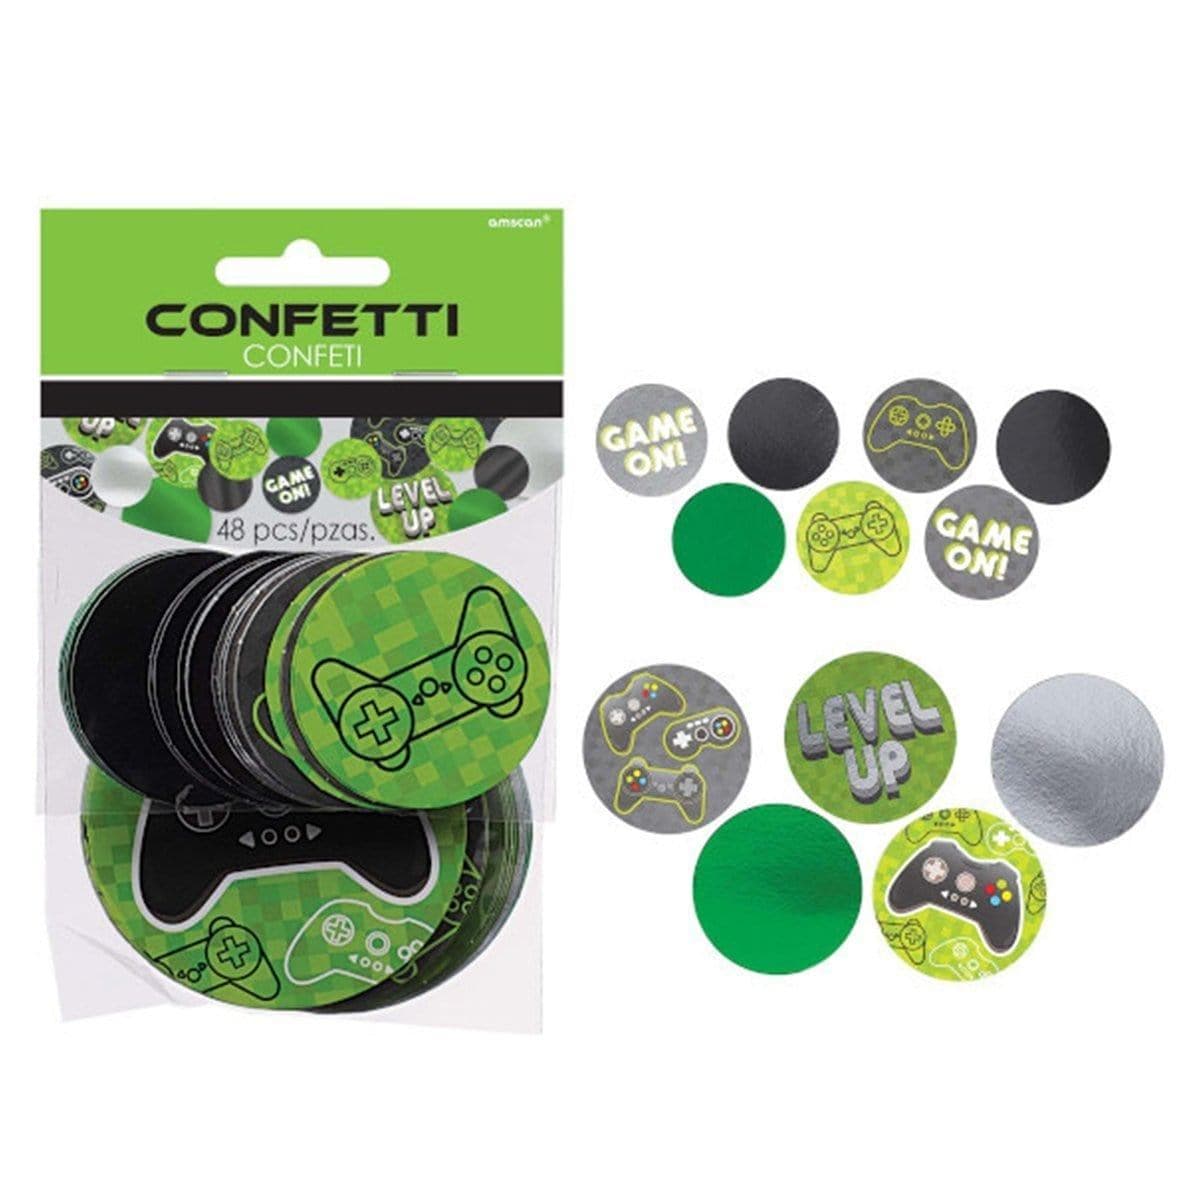 Buy Kids Birthday Level Up confetti sold at Party Expert